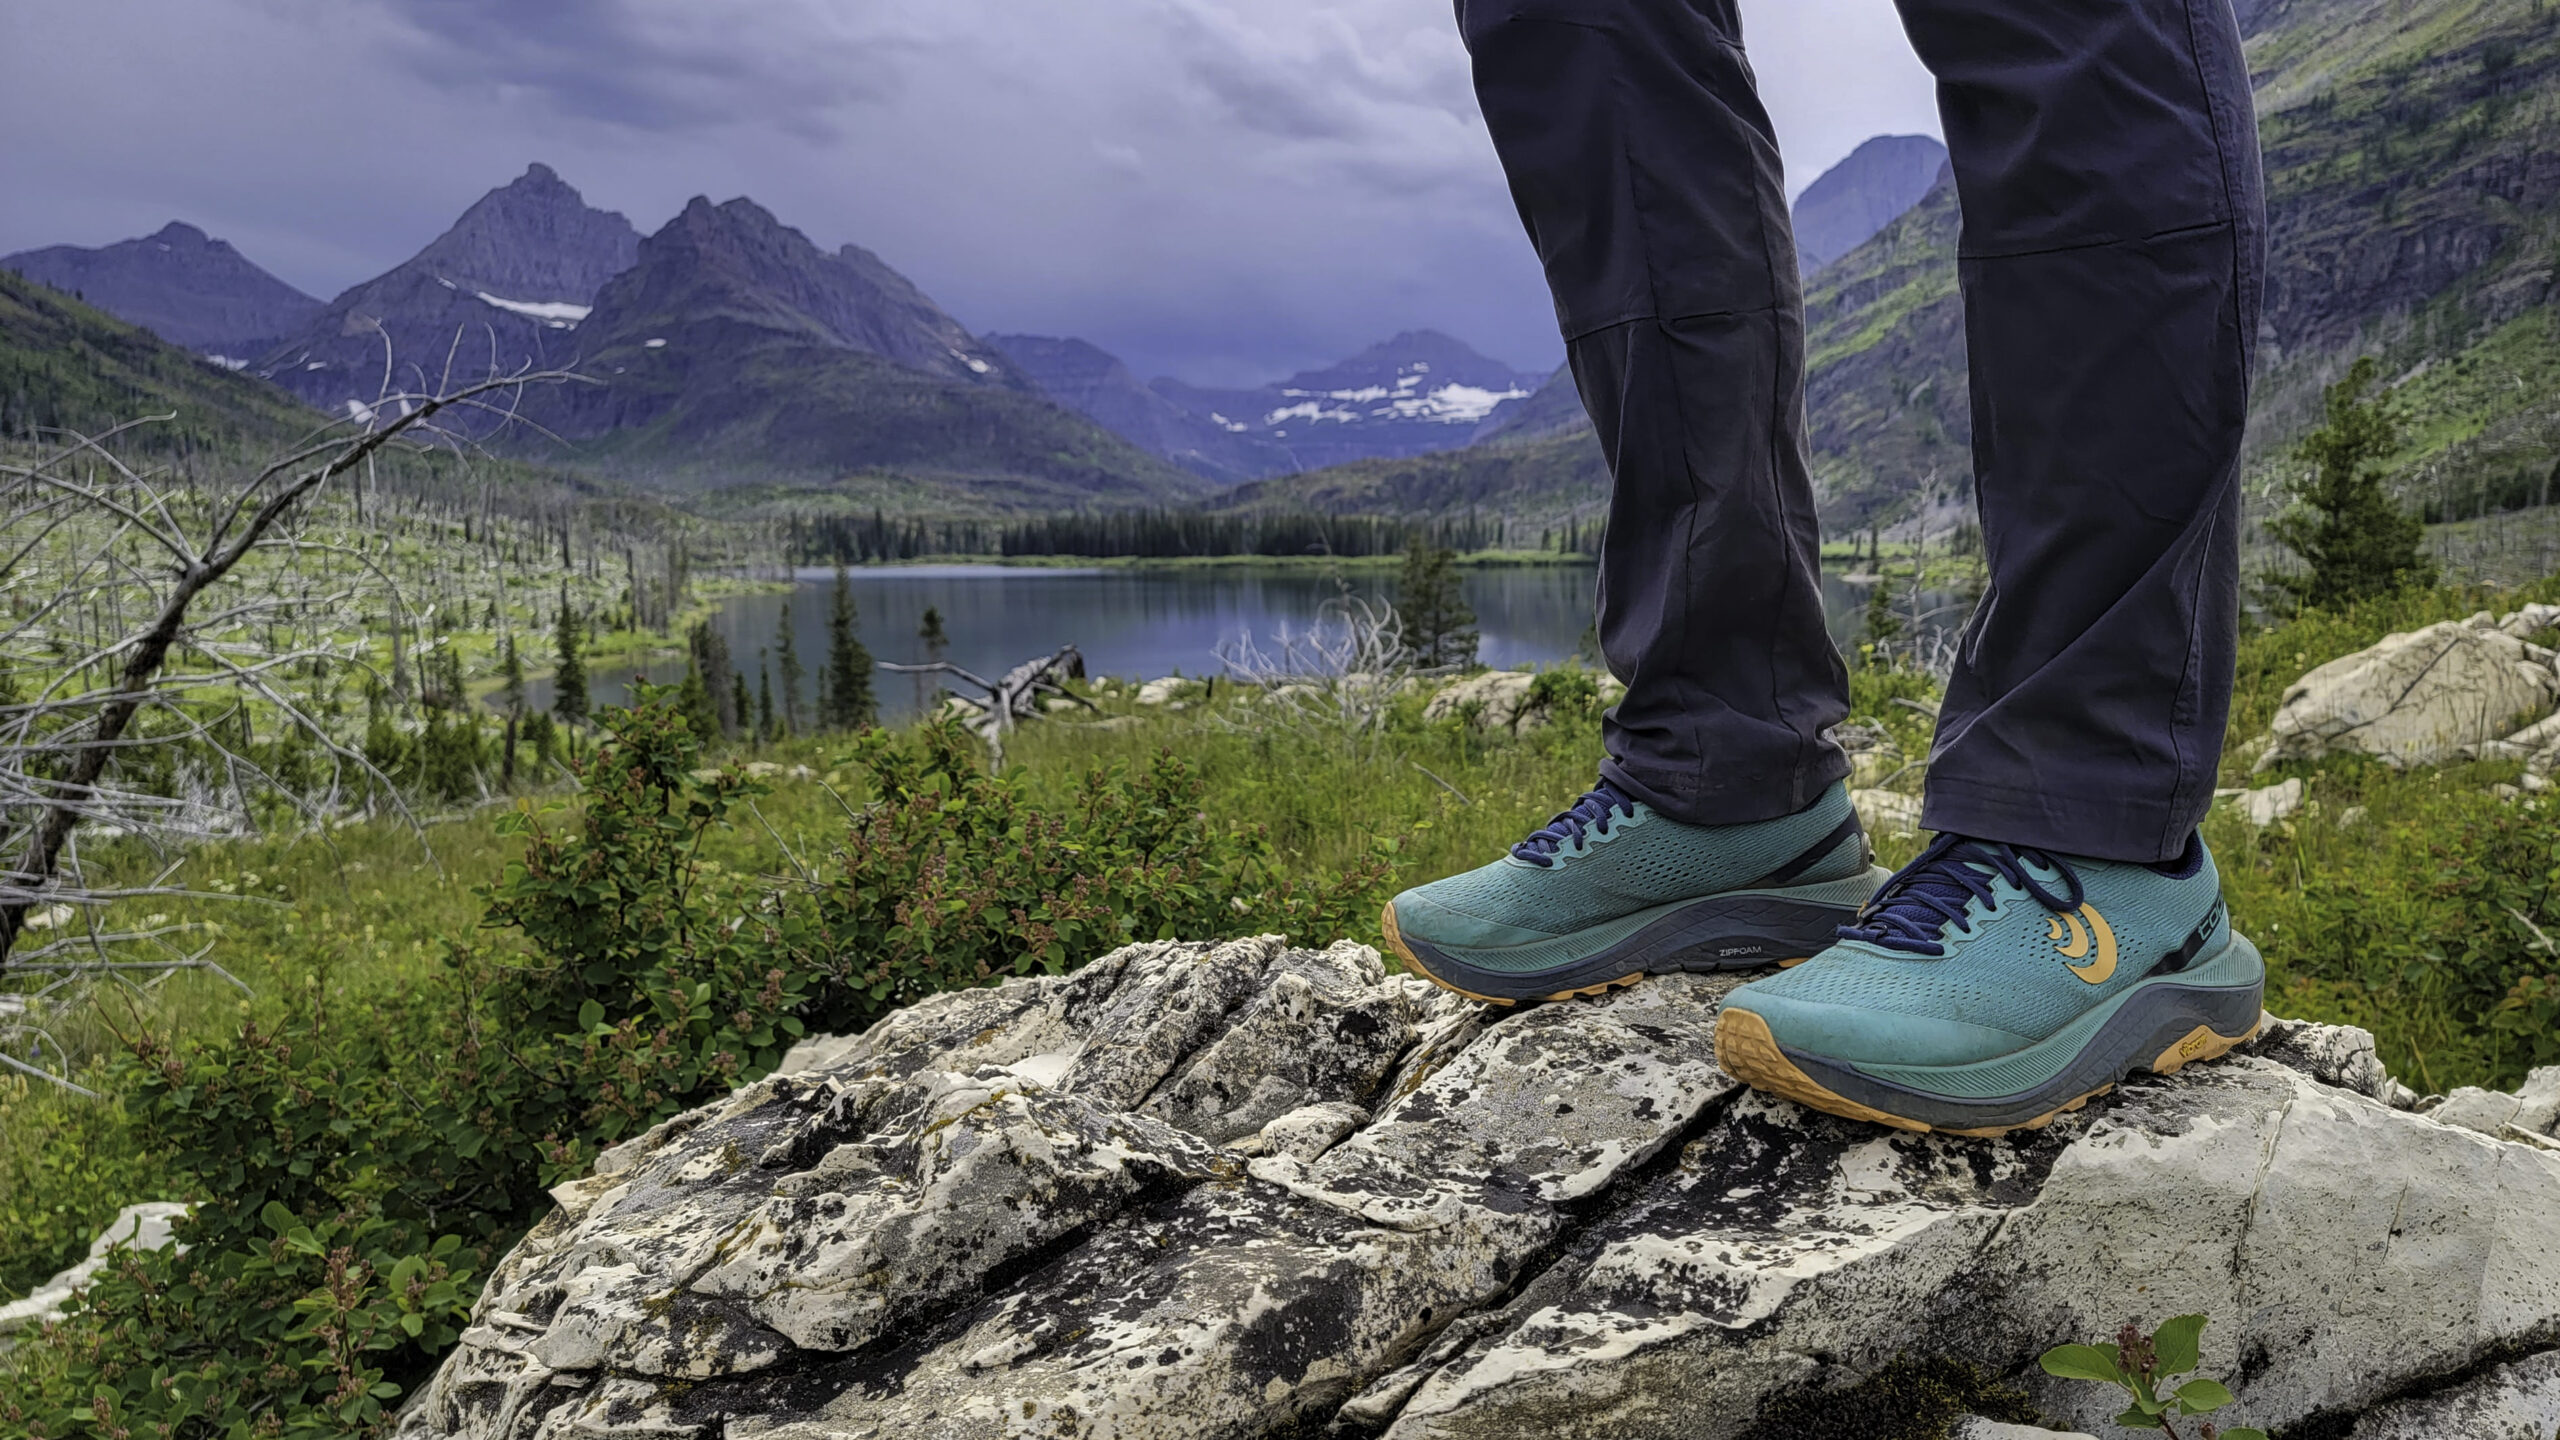 View All Men's Shoes: Running, Hiking & Everyday